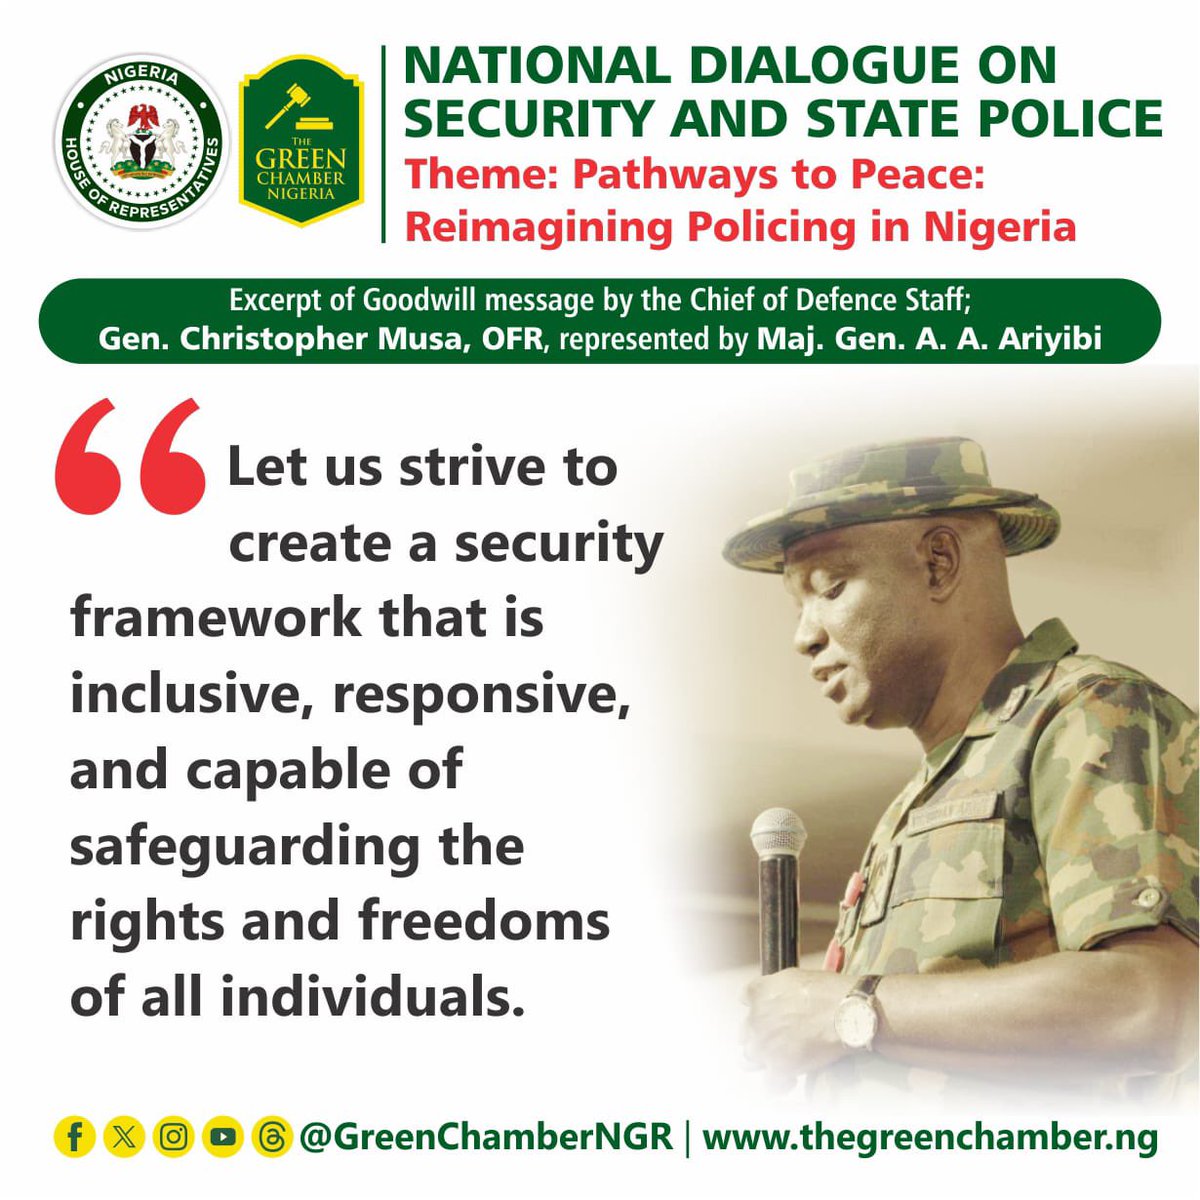 Excerpts from the goodwill message of the Chief of Defence Staff (CDS), General Christopher Musa delivered by Maj. Gen. A.A. Ariyibi at the National Dialogue on Security and State Police. 

#GreenChamberNGR #StatePoliceDialogue #NationalDialogue #StatePolice #Insecurity